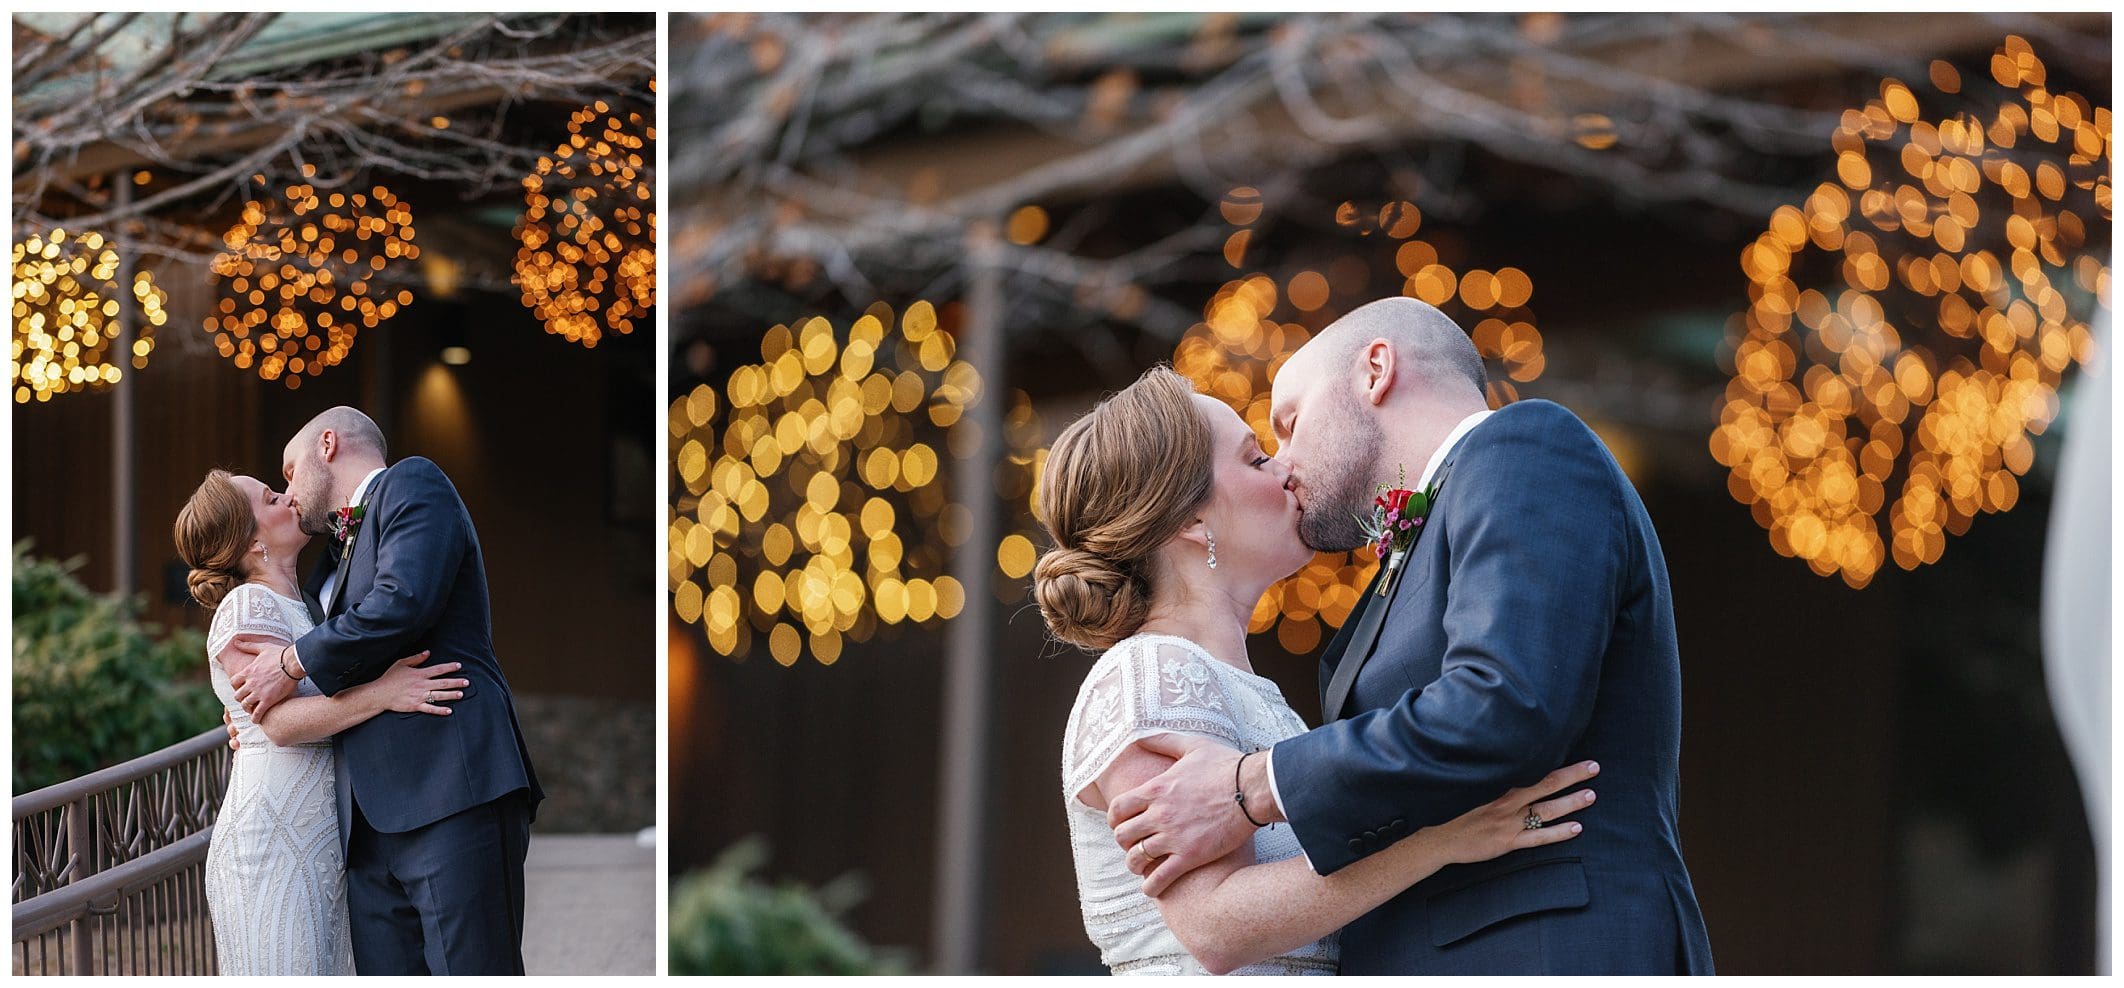 A bride and groom kiss in front of lights.